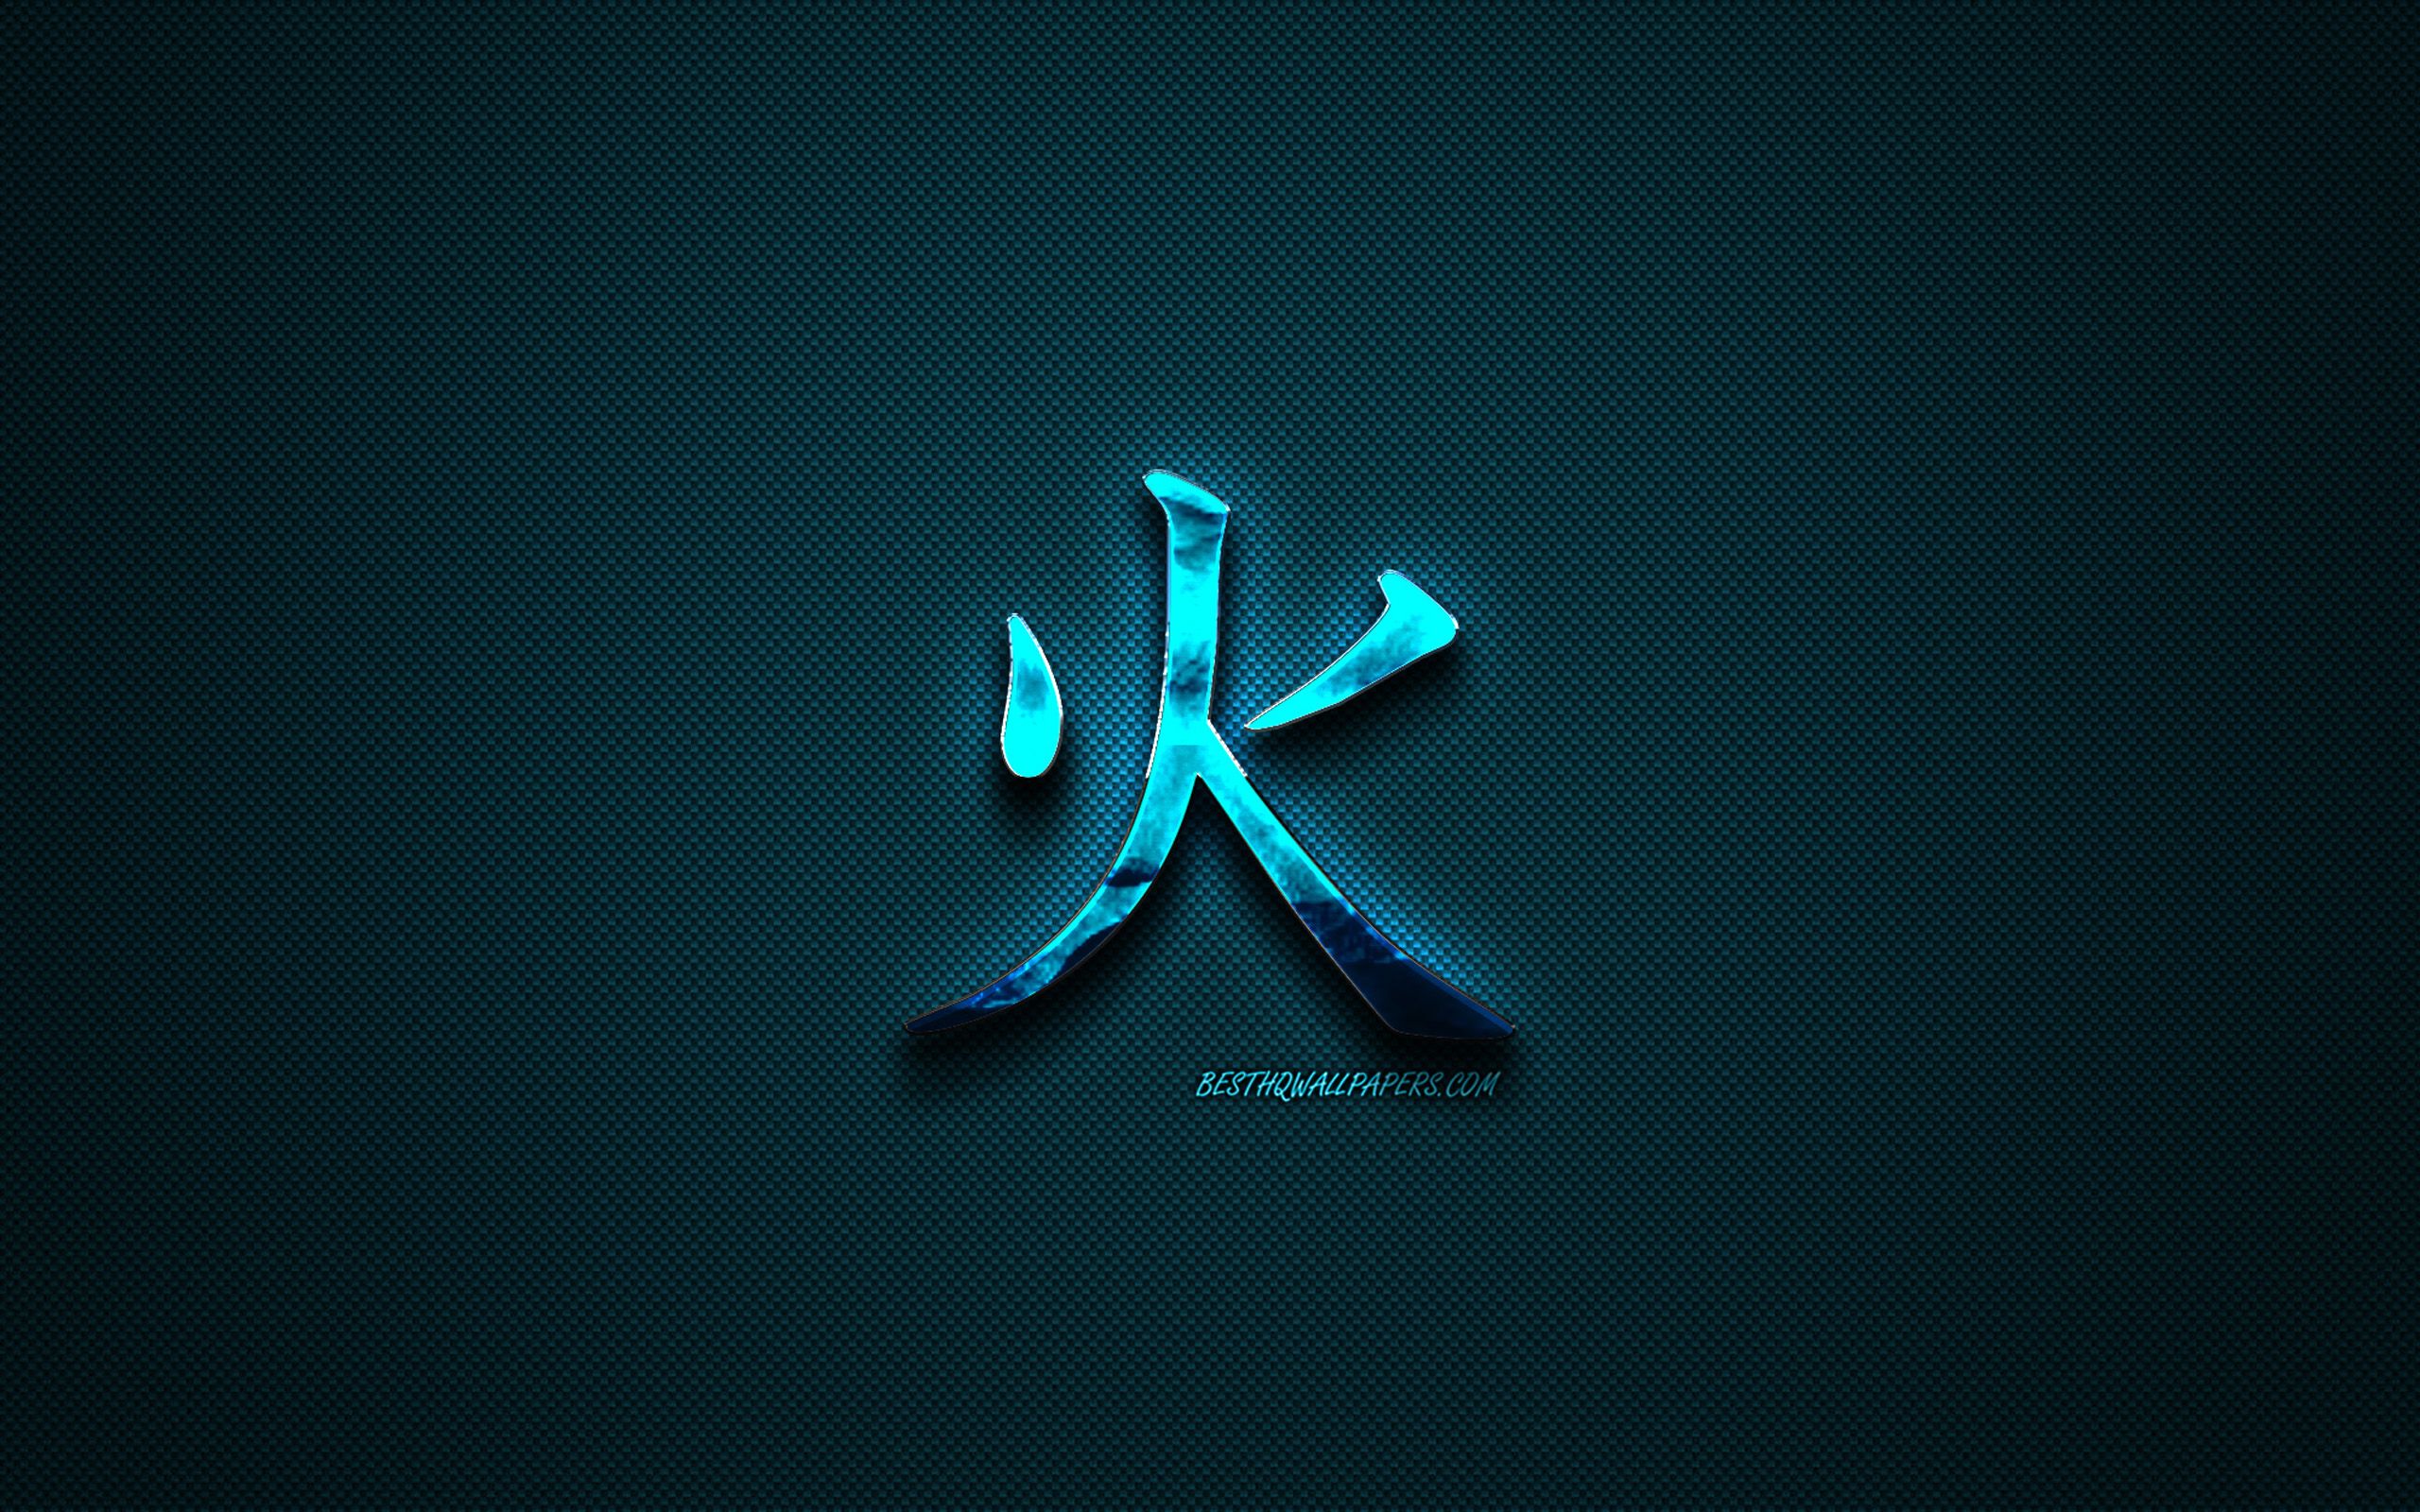 Download wallpaper Fire Japanese character, Kanji, blue creative art, Fire Japanese hieroglyph, Fire Kanji Symbol, blue metal texture, Fire hieroglyph for desktop with resolution 2560x1600. High Quality HD picture wallpaper